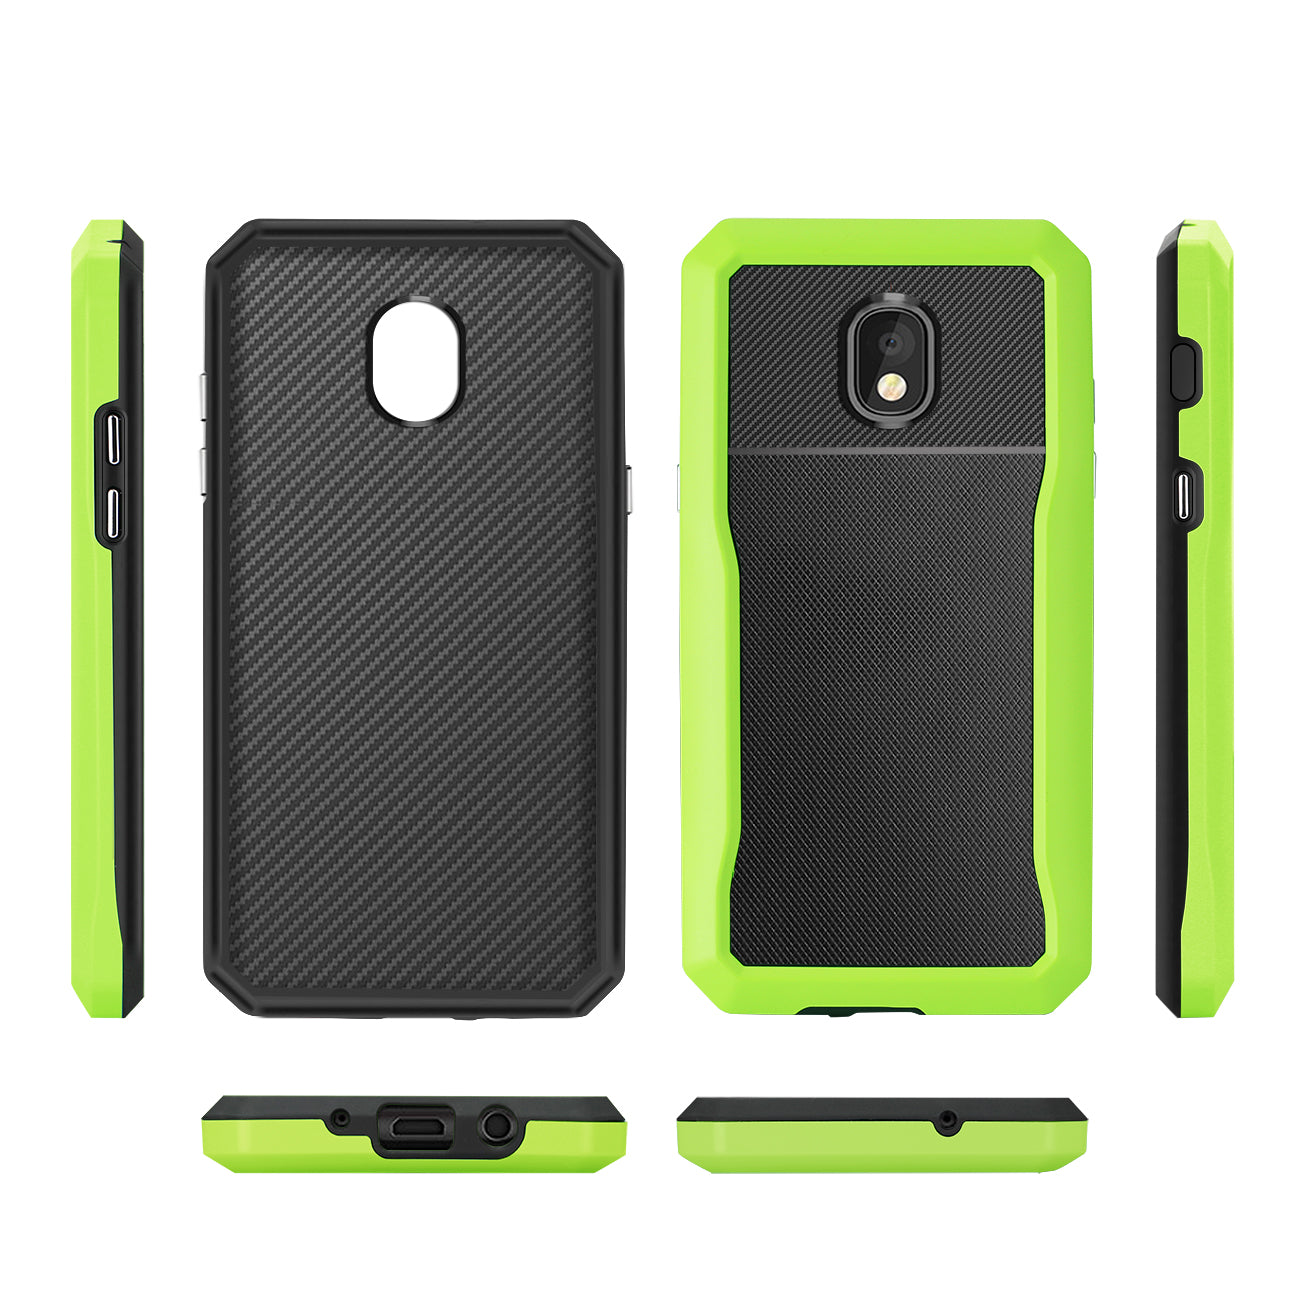 Reiko SAMSUNG GALAXY J7 (2018) Full Coverage Shockproof Case In Green